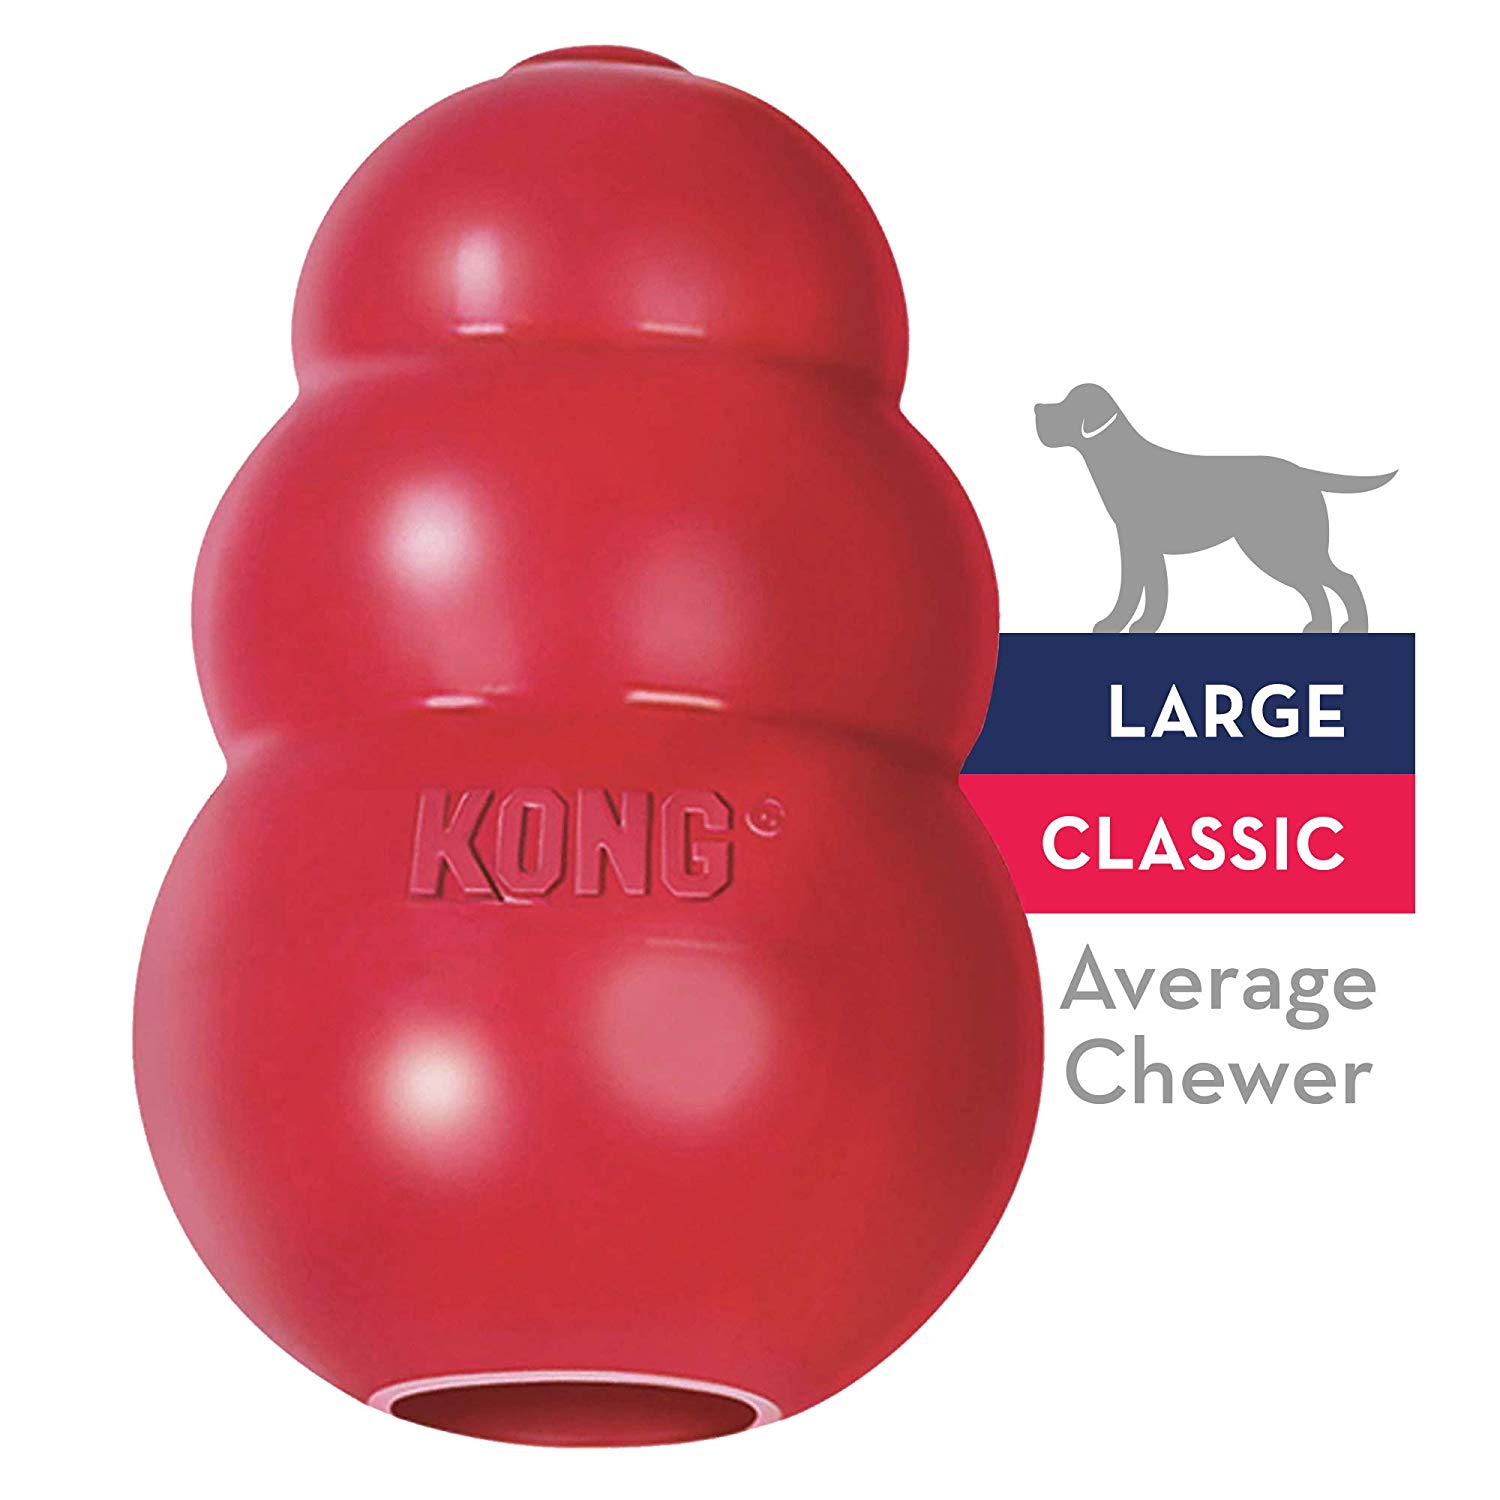 safe chew toys for puppies